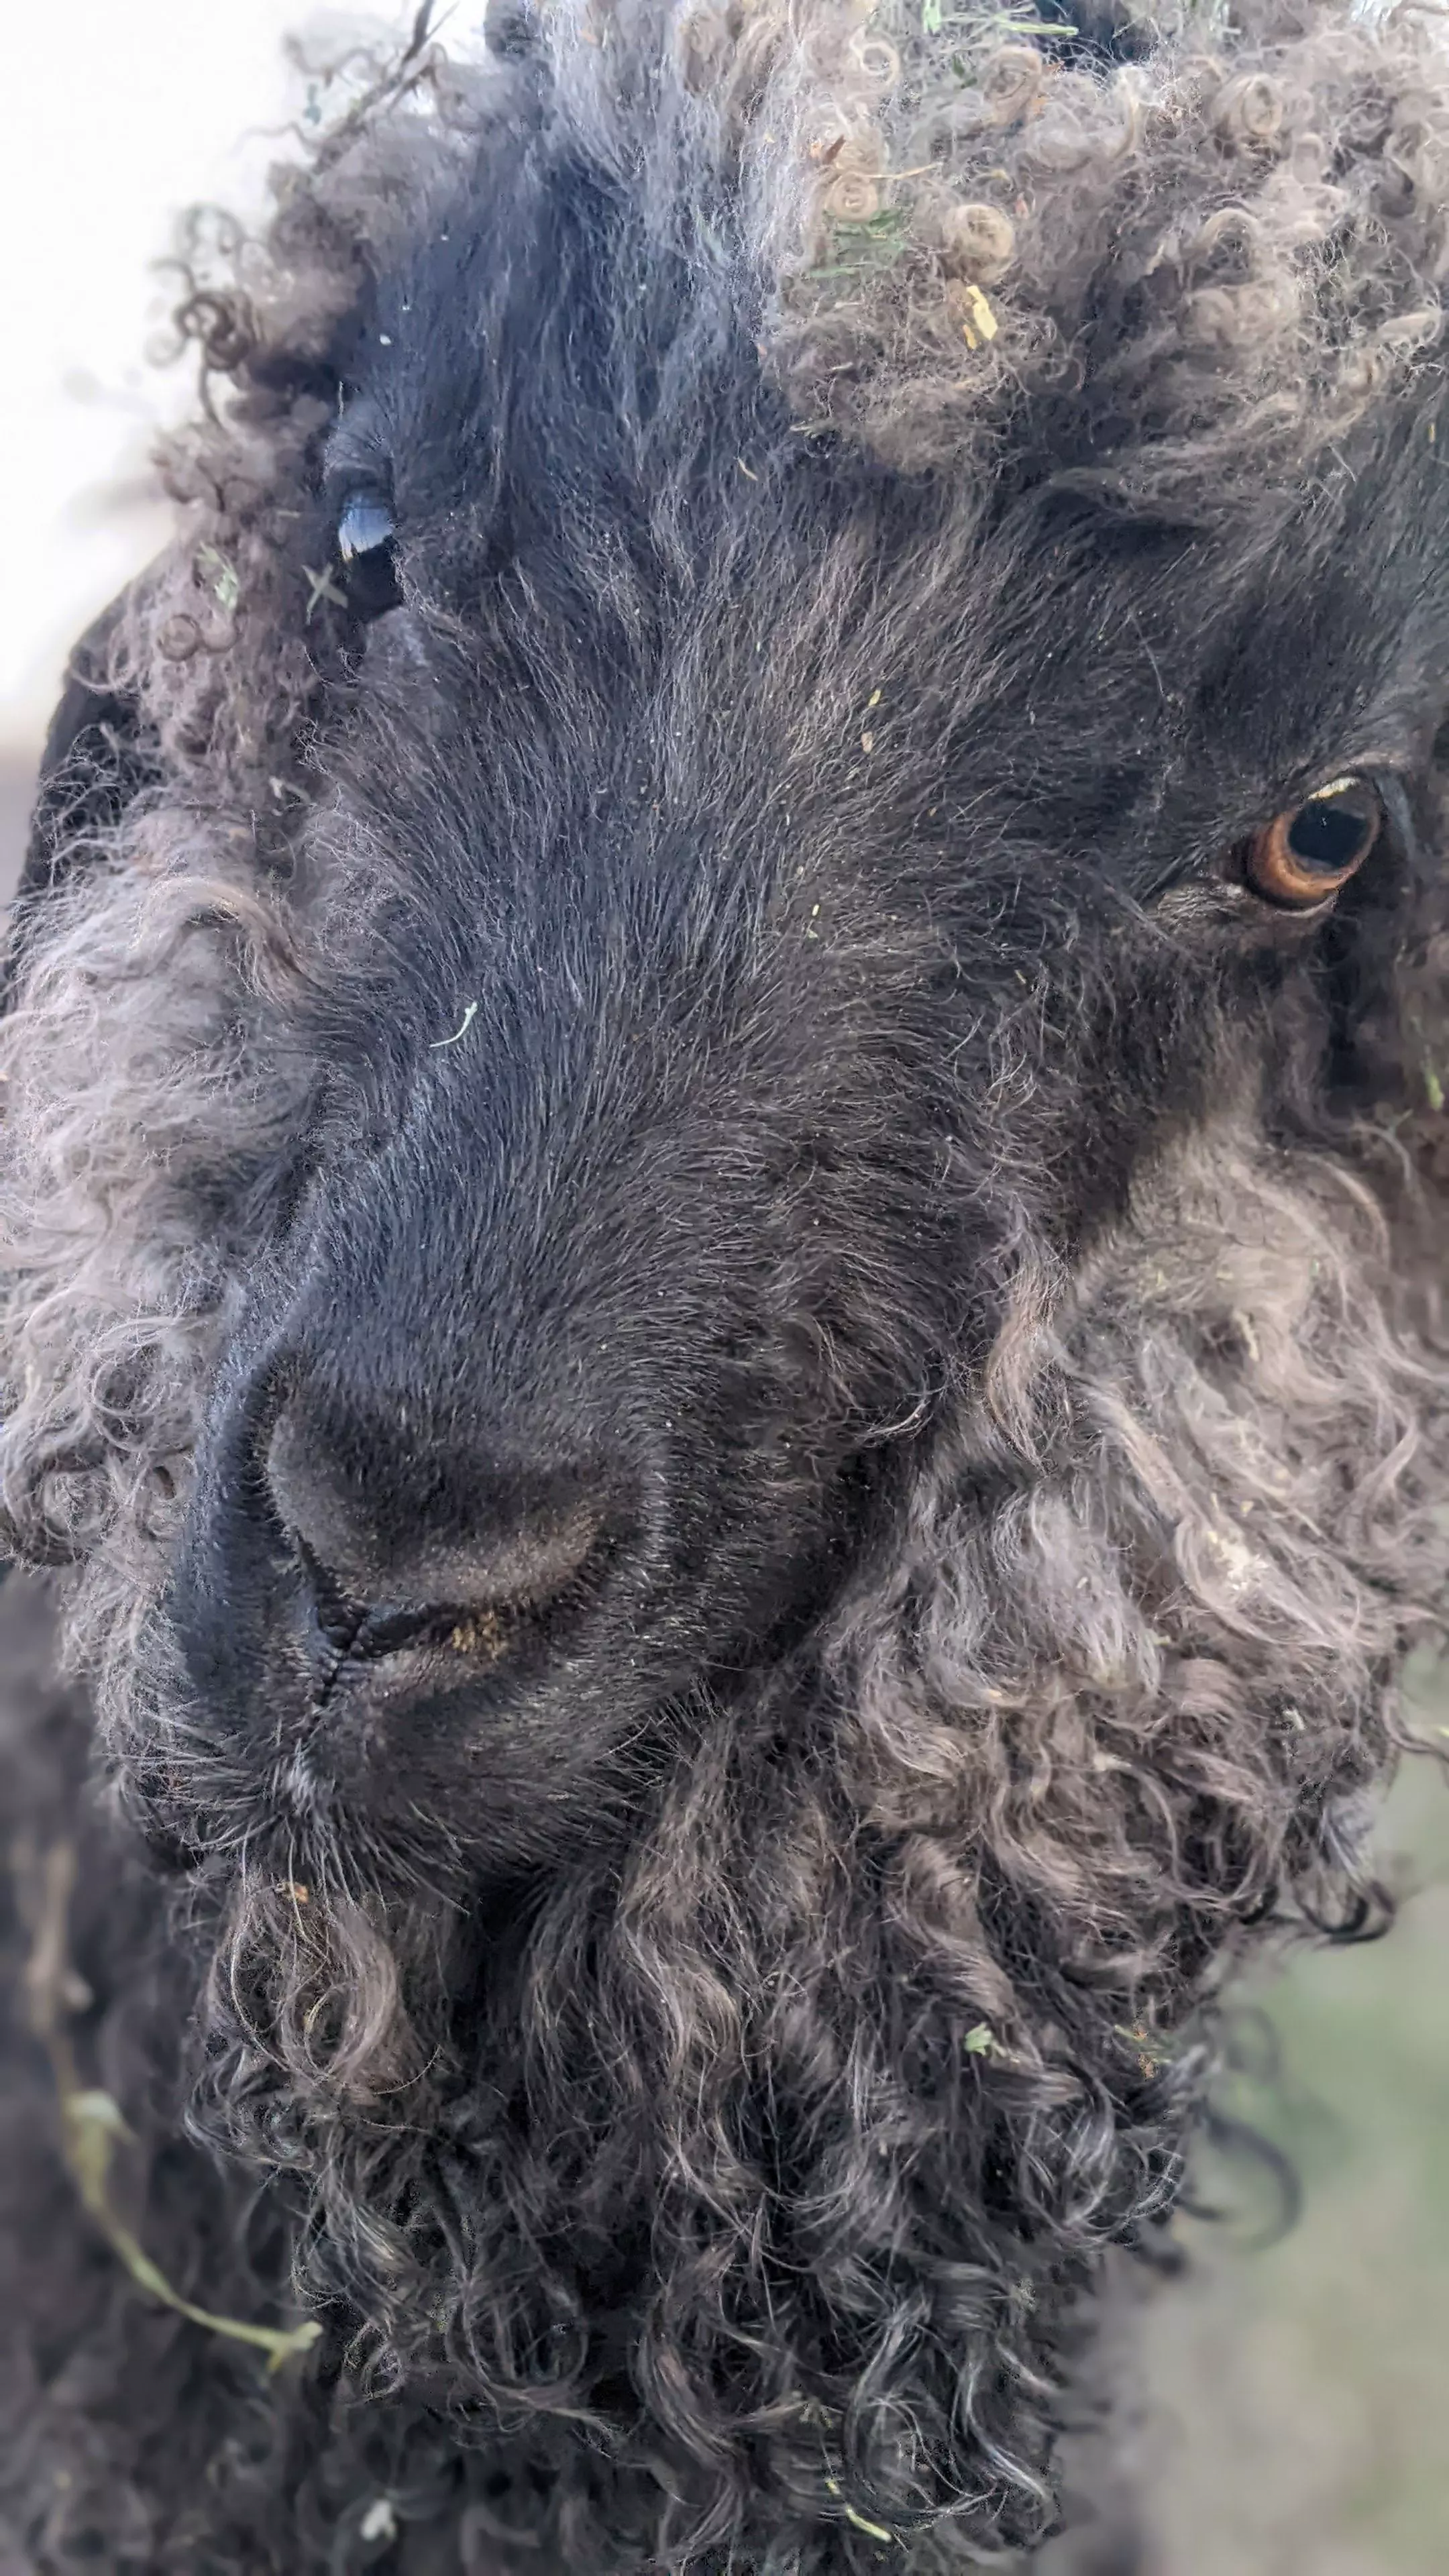 A portrait image of a goat named Teff